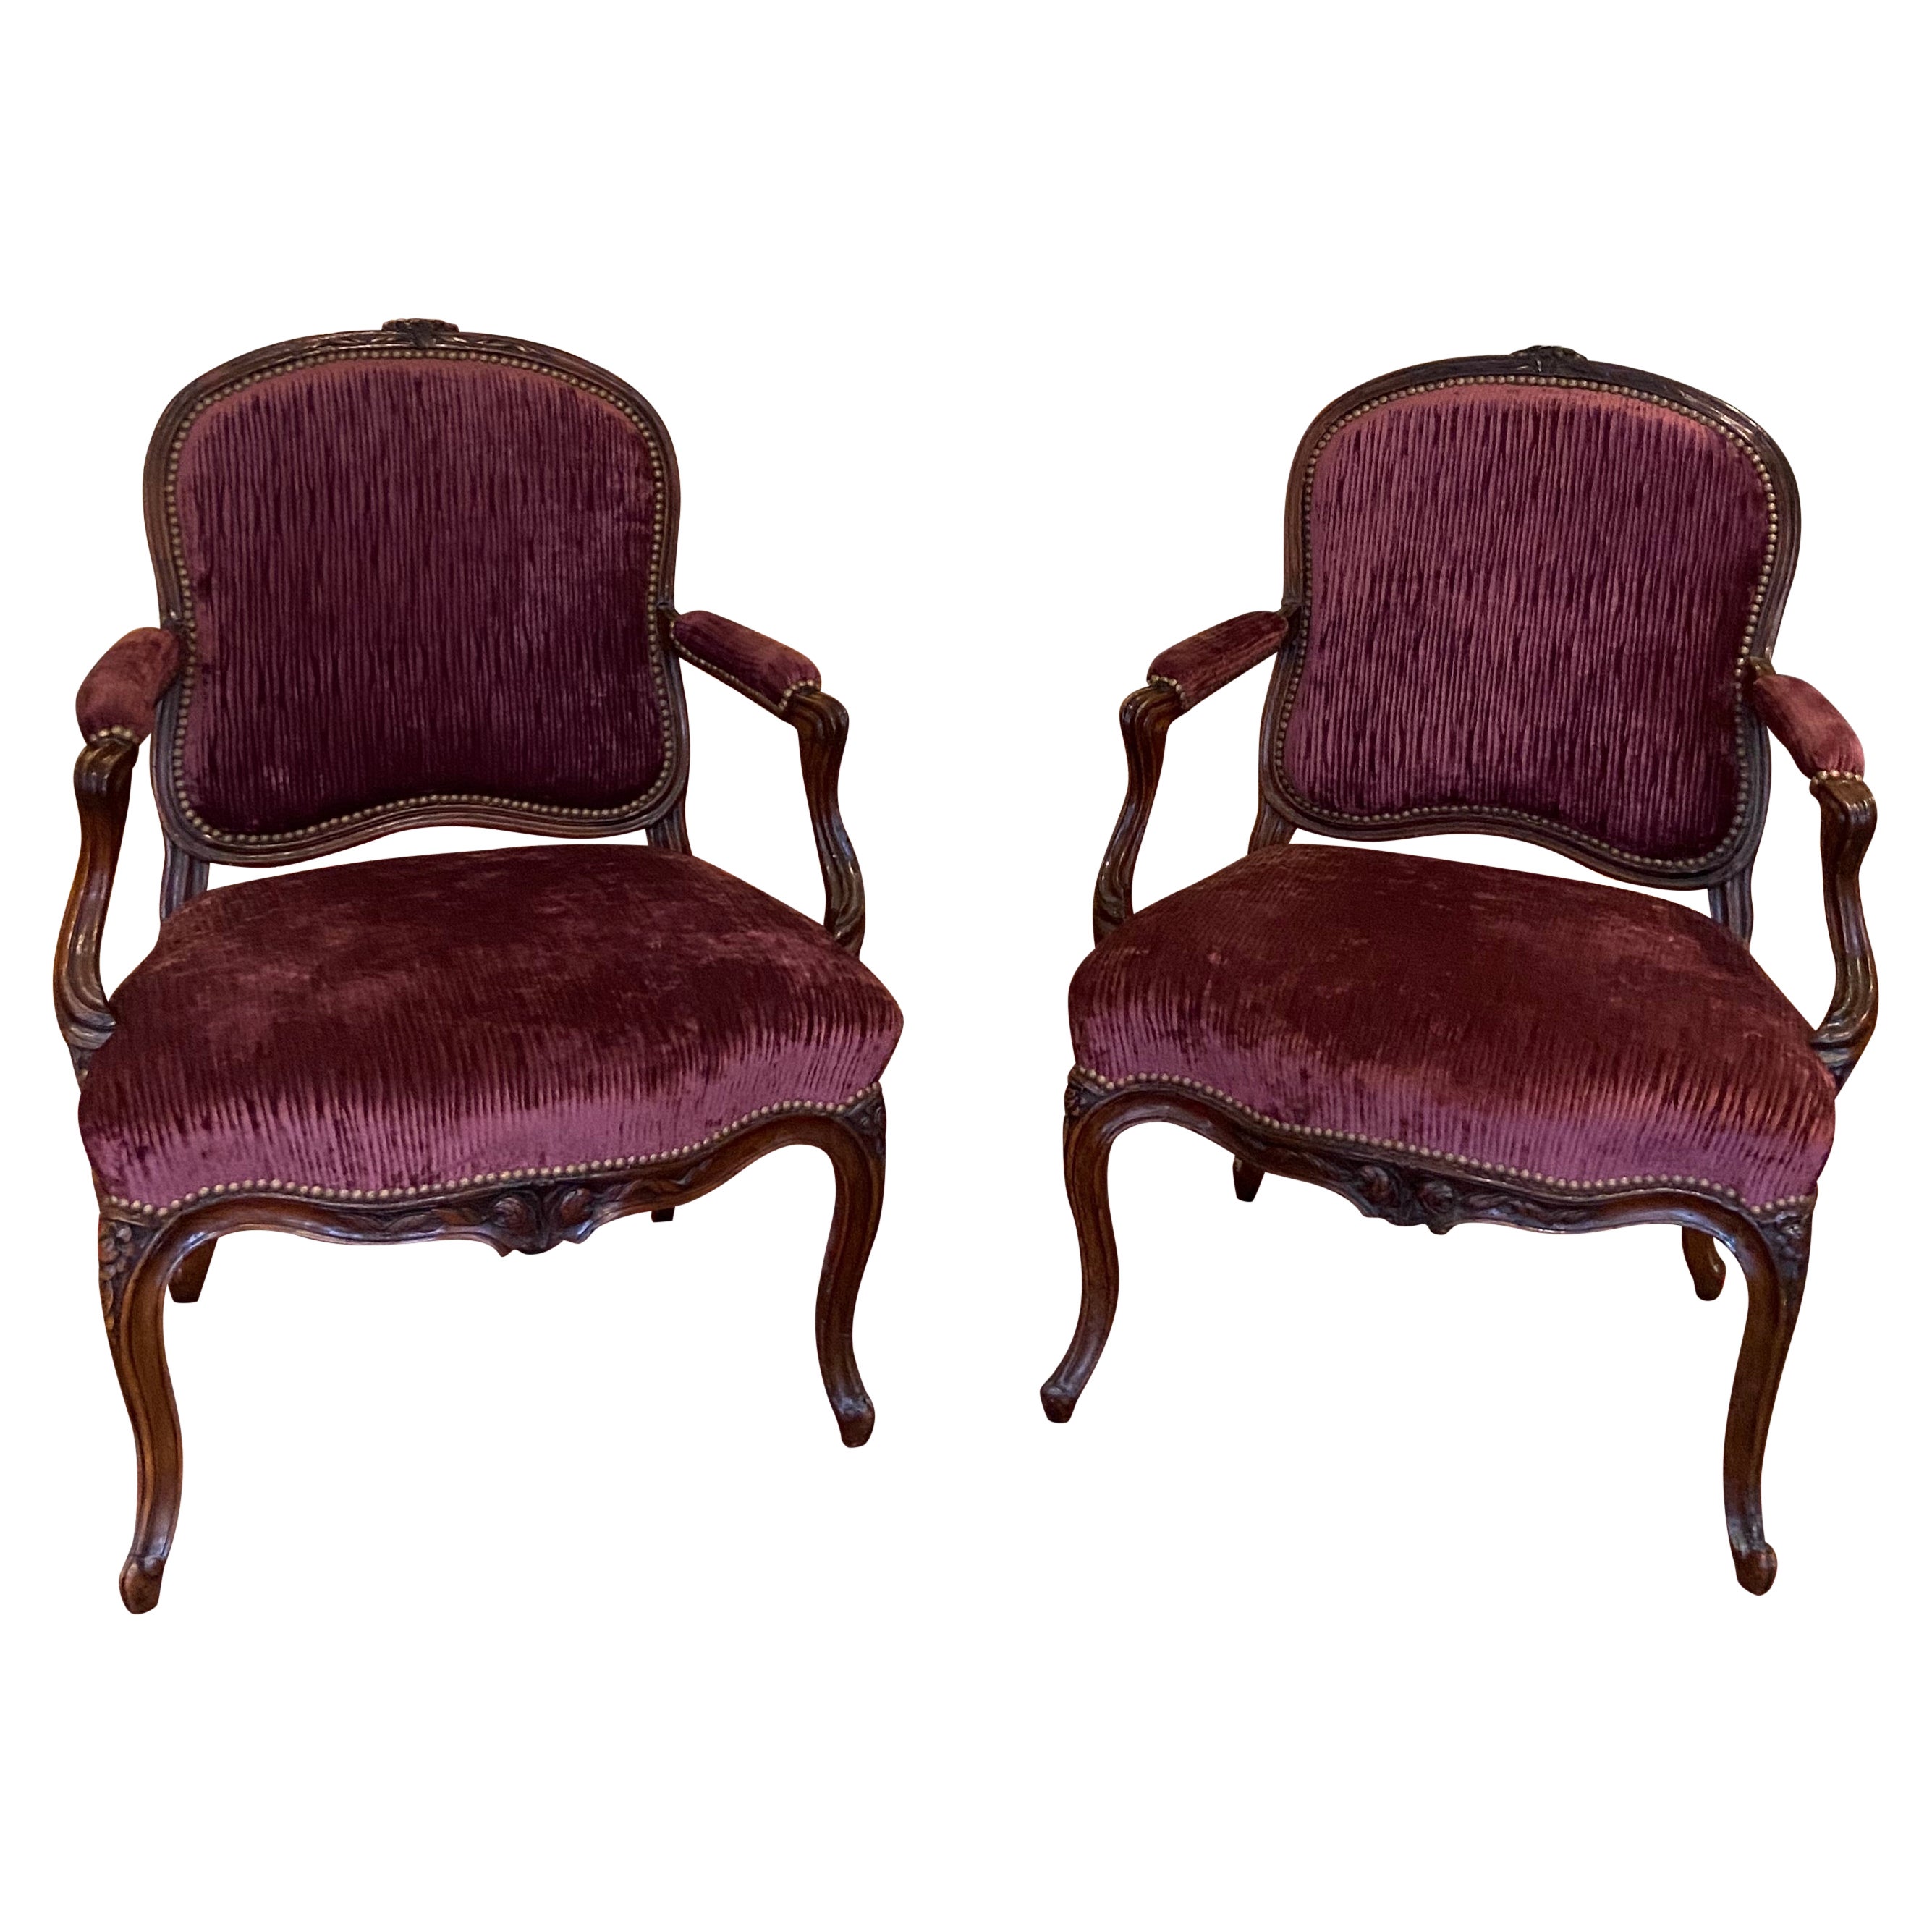 A Pair of Early Provincial Louis XV Walnut Fauteuils 'Mid 18th Century' For Sale